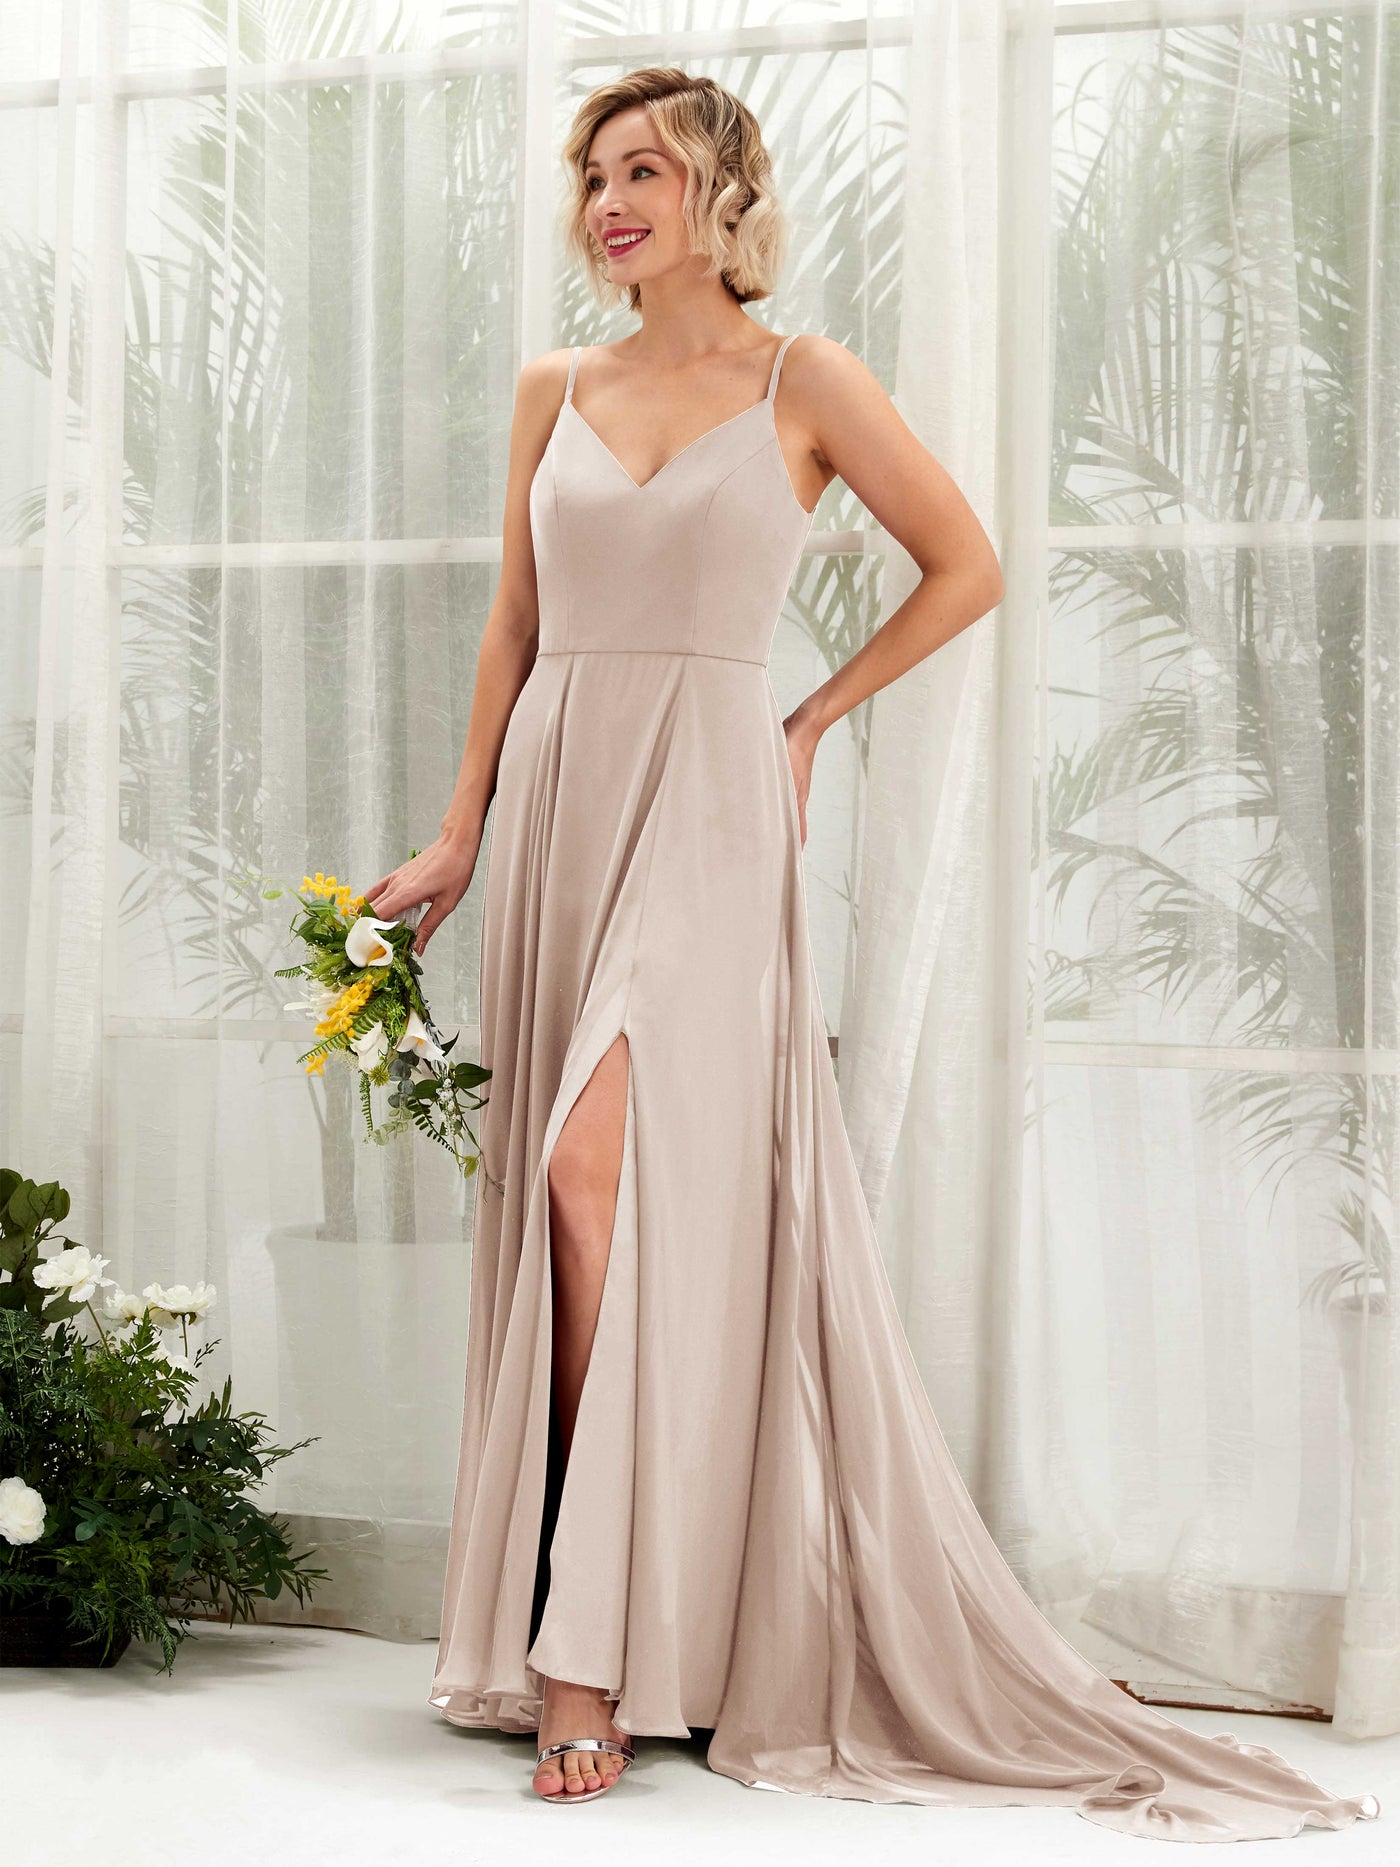 Champagne Bridesmaid Dresses Bridesmaid Dress A-line Chiffon V-neck Full Length Sleeveless Wedding Party Dress (81224116)#color_champagne